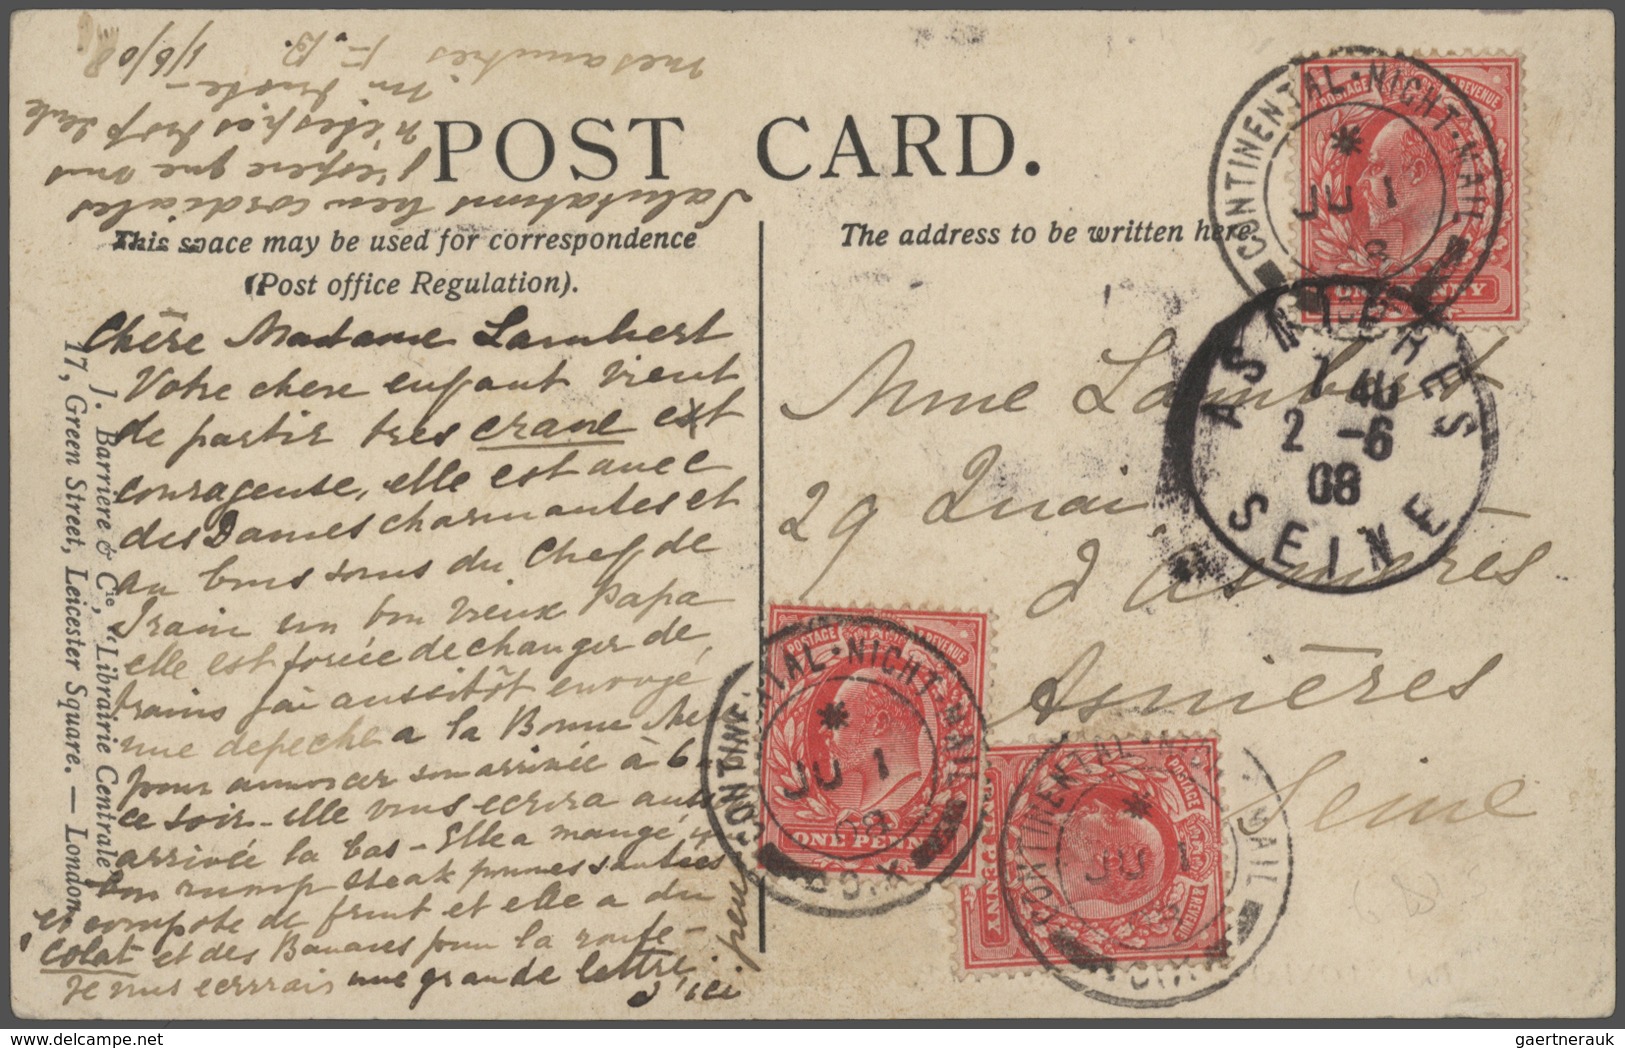 26647 Großbritannien: 1836/1946: 77 better covers and postal stationeries including pre-philatelic, used A